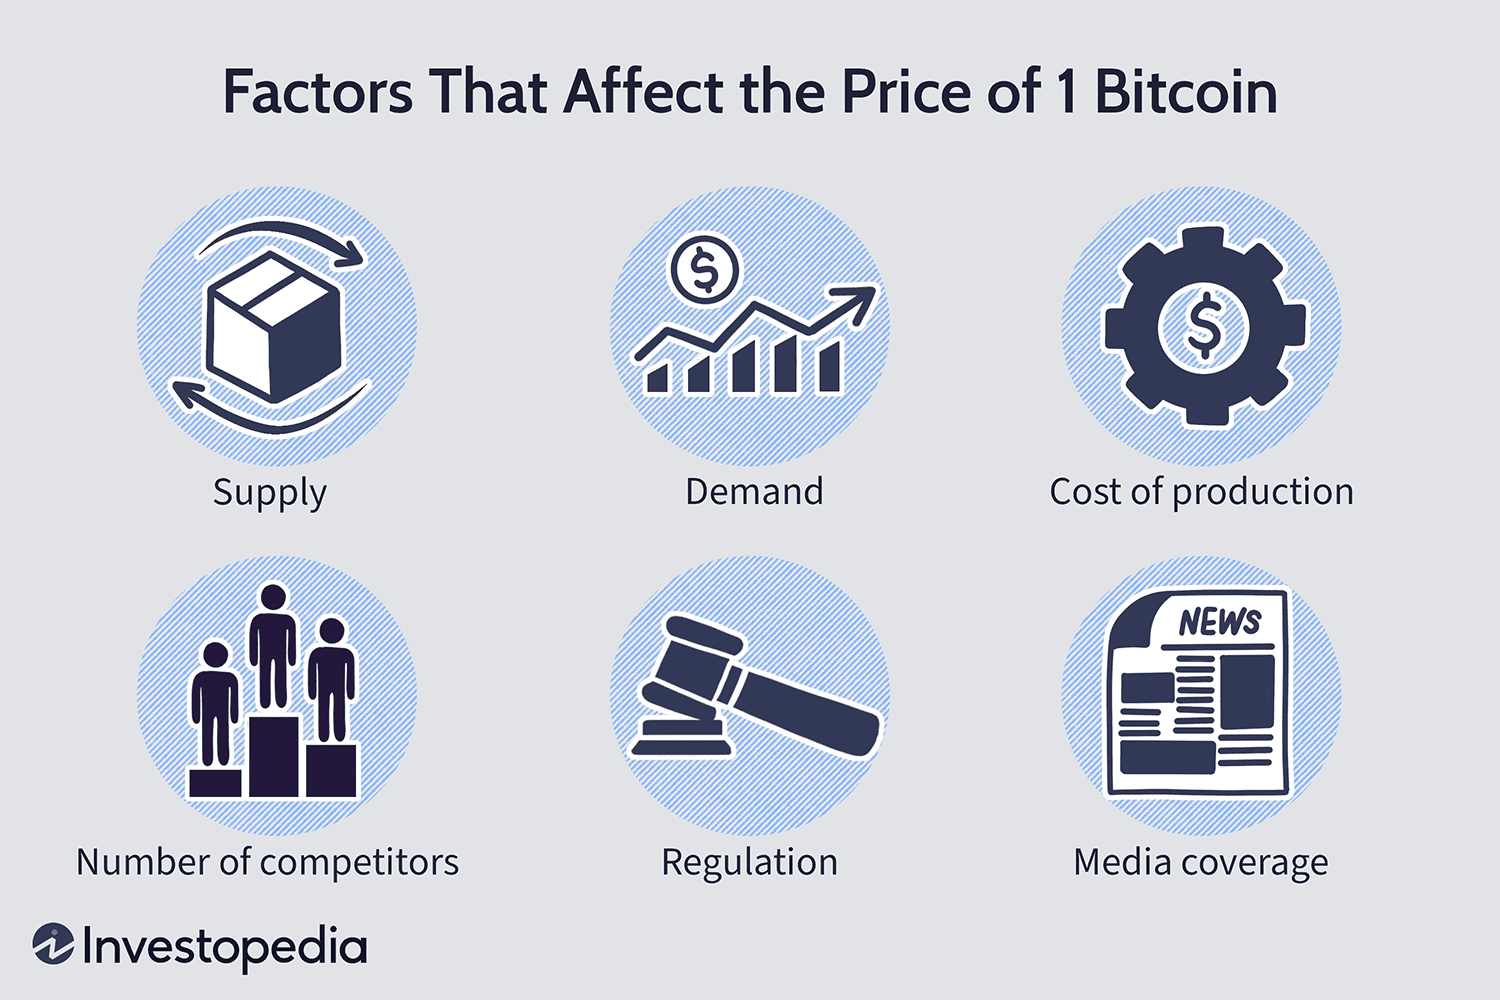 Bitcoin: four reasons why the price should surge in 